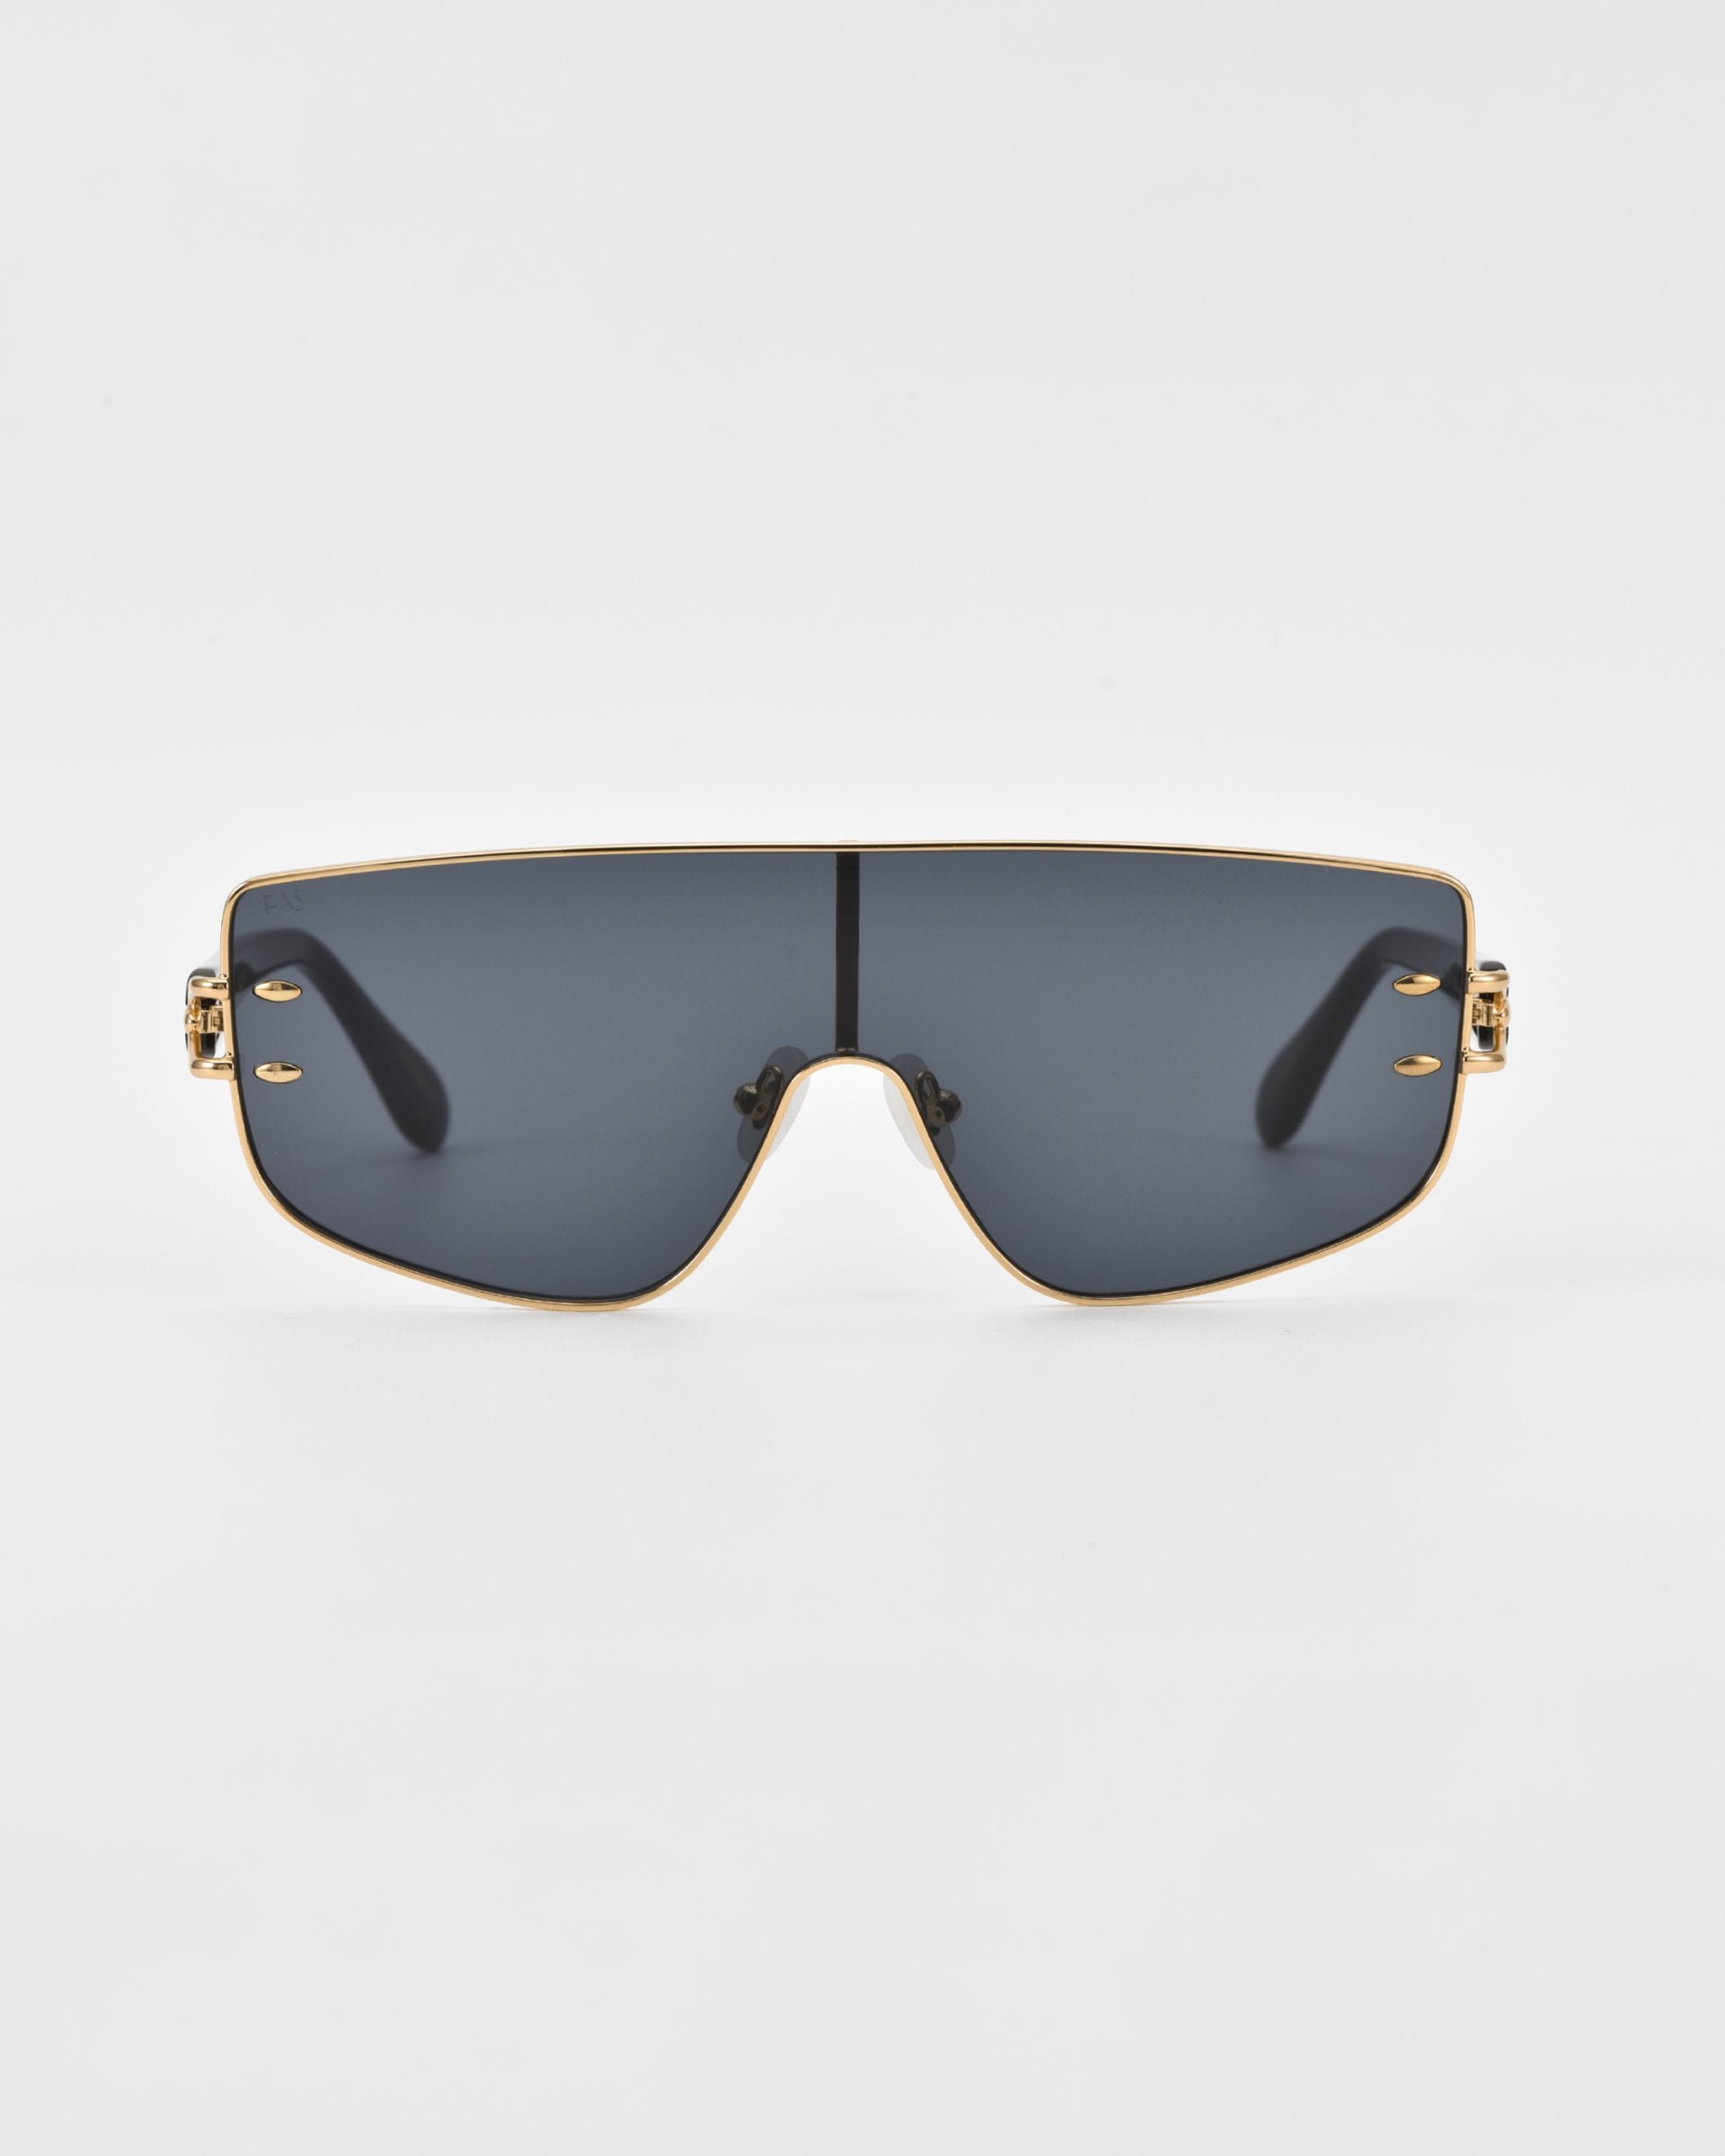 These For Art&#39;s Sake® Flare sunglasses feature oversized, dark-tinted lenses and a thin, gold-colored frame. With a flat-top design and decorative accents on the corners, they exude a futuristic design. The background is plain white.